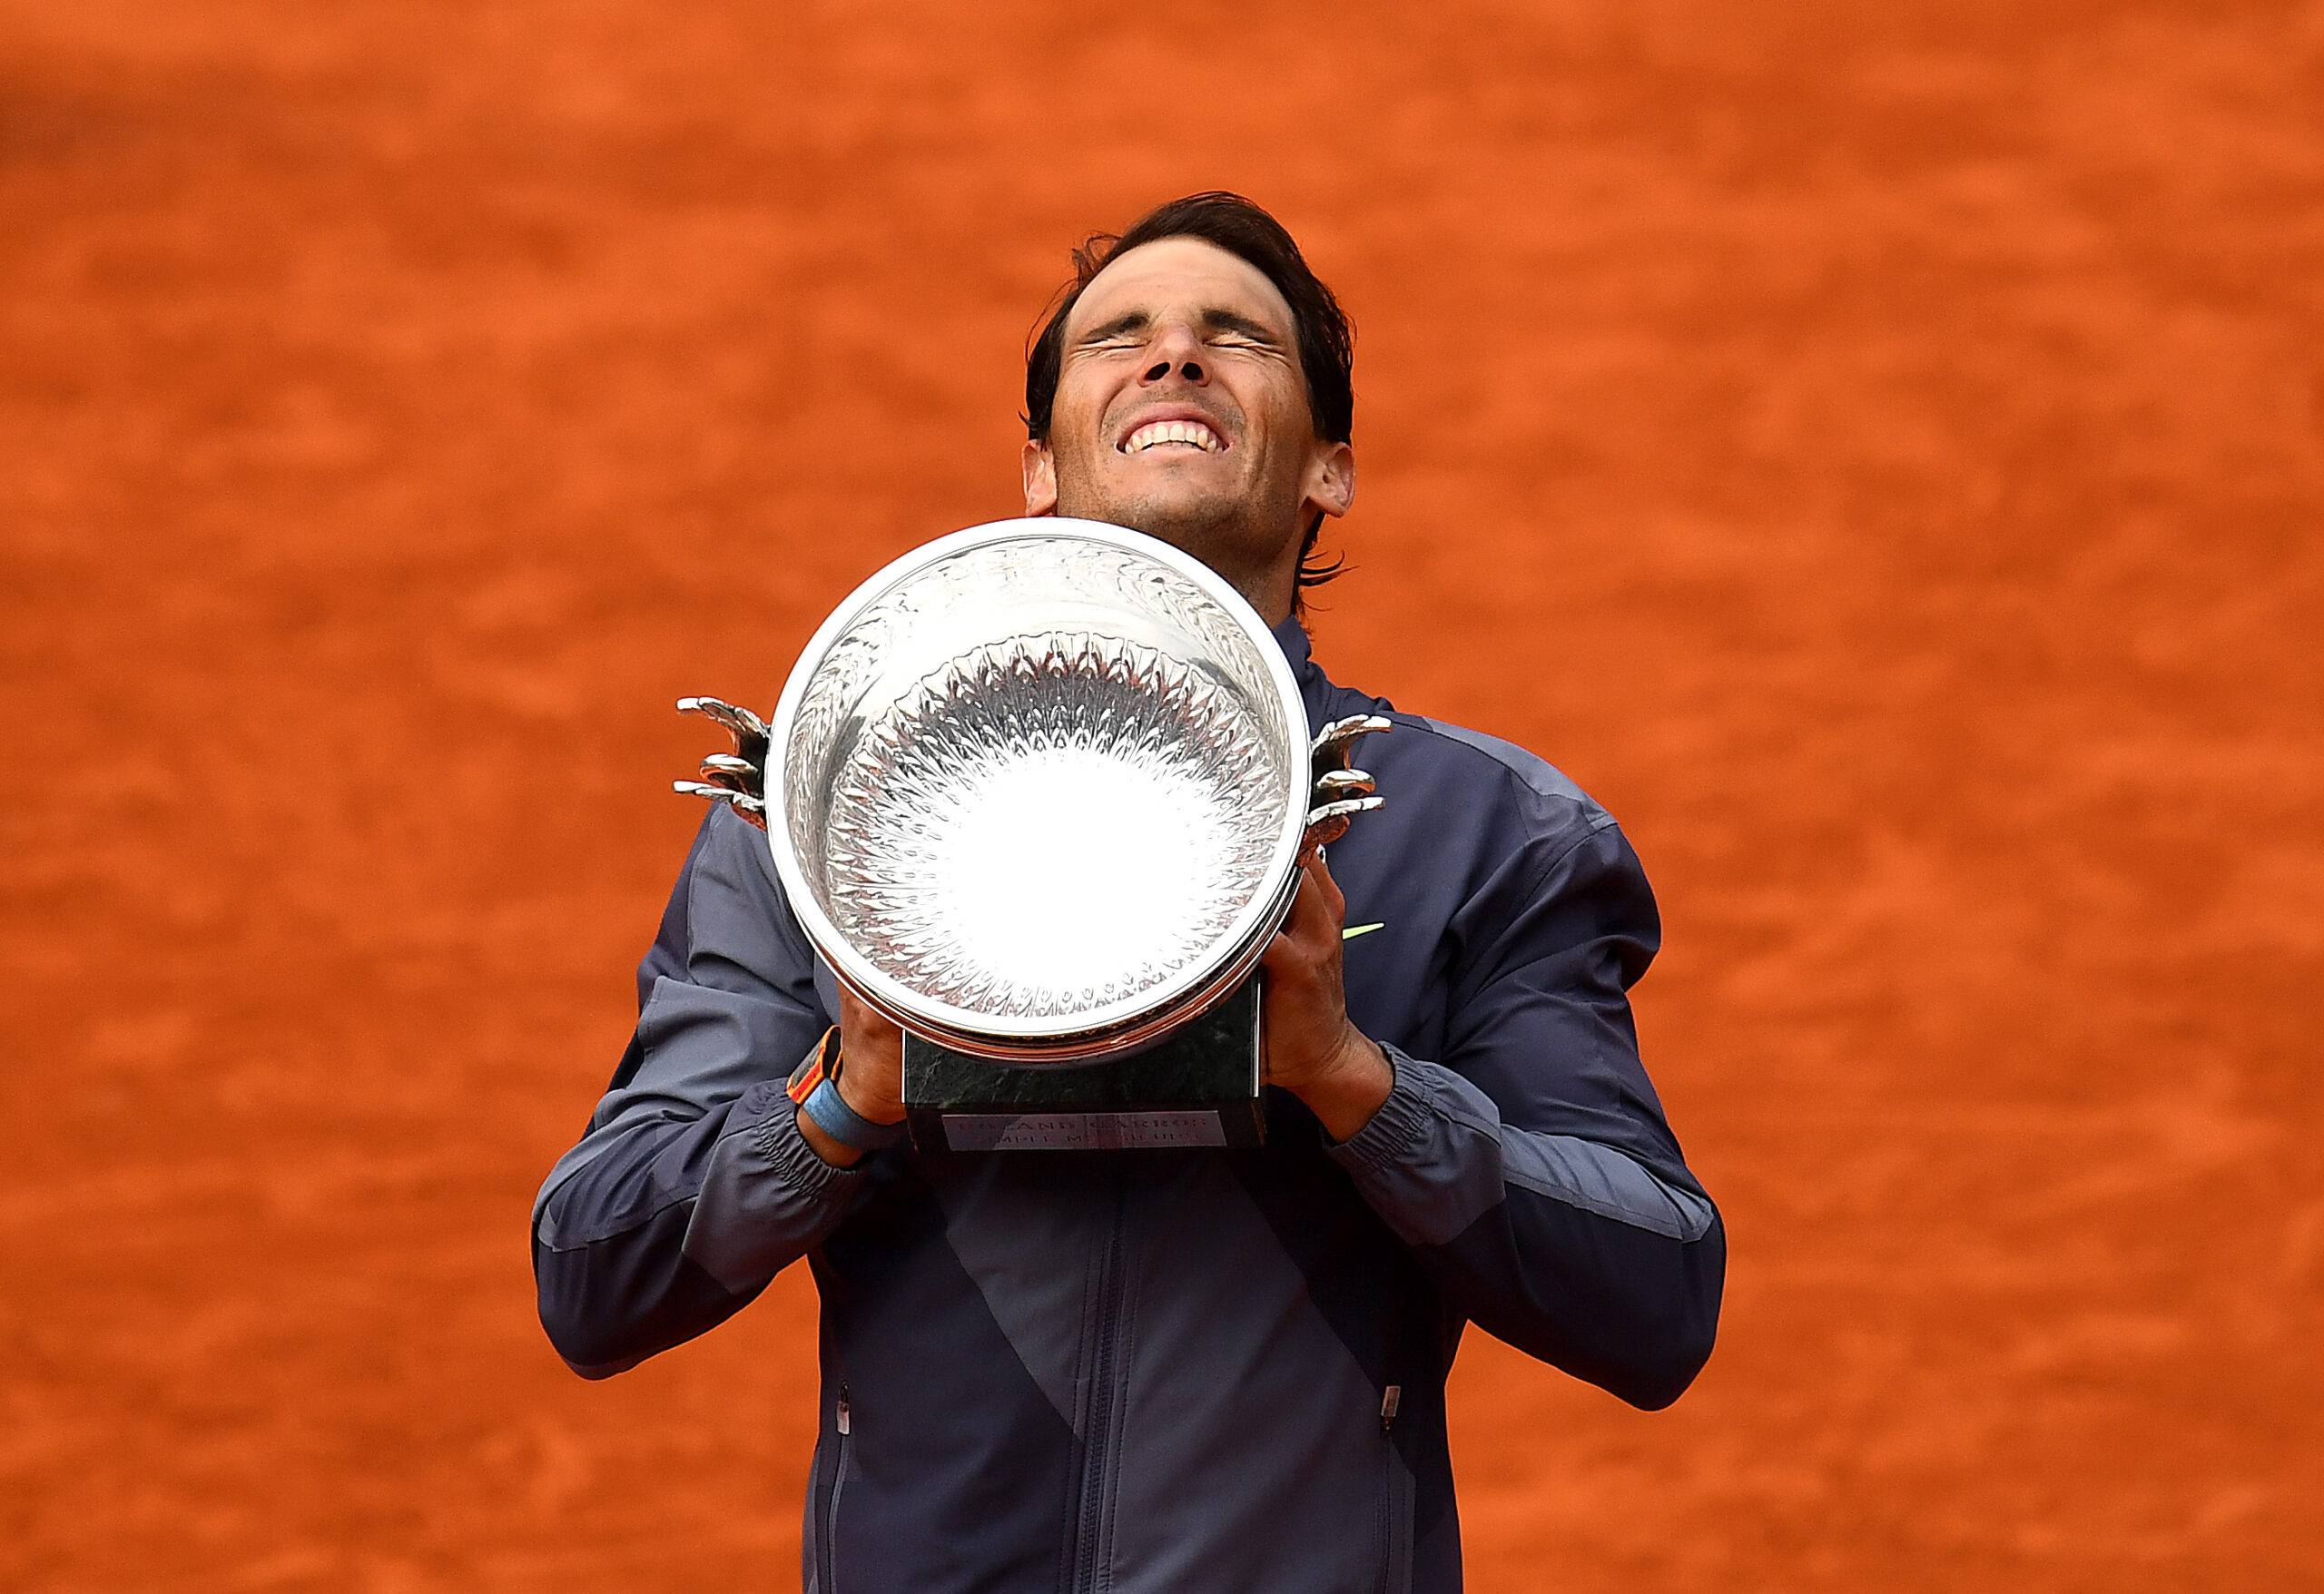 Rafael Nadal at the French Open